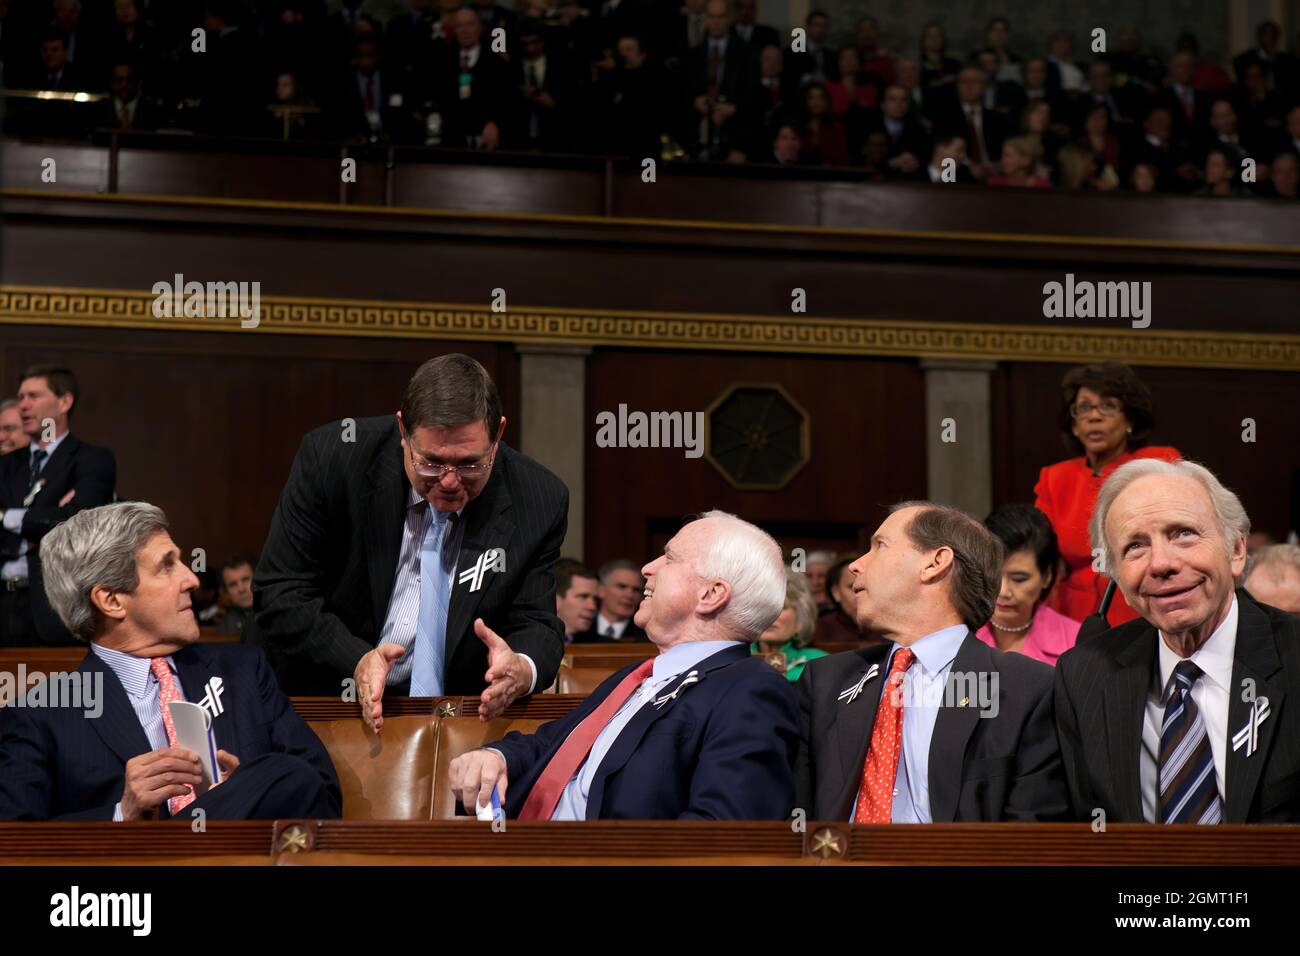 From left: Sen. John Kerry, D-Mass.; Rep. Michael Burgess, R-Texas.; Sen. John McCain, R-Ariz.; Sen. Tom Udall, D-N.M.; and Sen. Joe Lieberman, I-Conn., talk in the House Chamber before the start of President Barack Obama's State of the Union address at the U.S. Capitol, in Washington, D.C., Jan. 25, 2010. (Official White House Photo by David Lienemann) This official White House photograph is being made available only for publication by news organizations and/or for personal use printing by the subject(s) of the photograph. The photograph may not be manipulated in any way and may not be used i Stock Photo